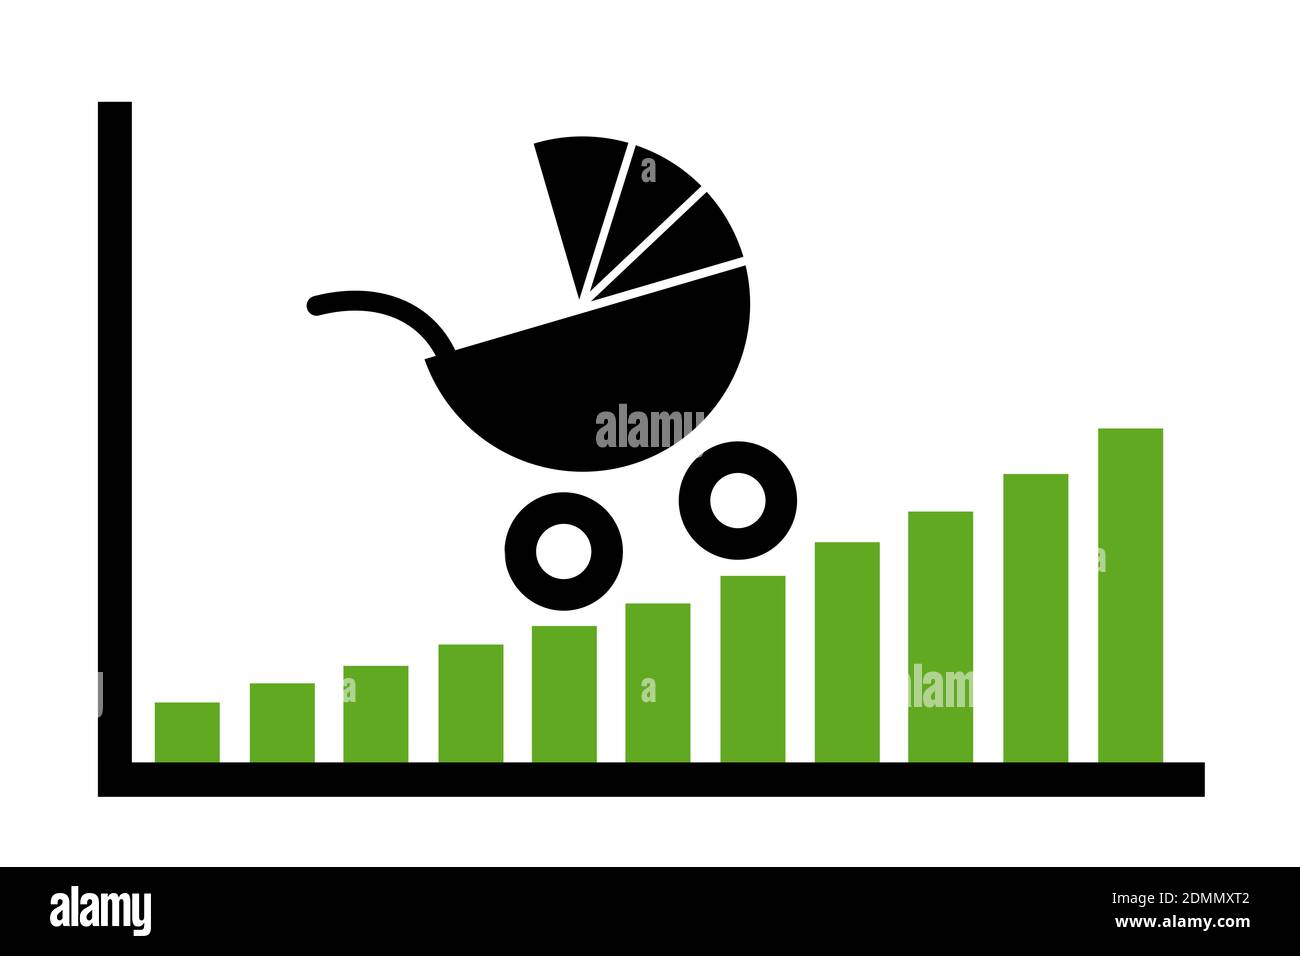 Birth rate is increasing and growing - chart and graph of high and positive fertility rate. Population and natality statistics. Vector illustration Stock Photo